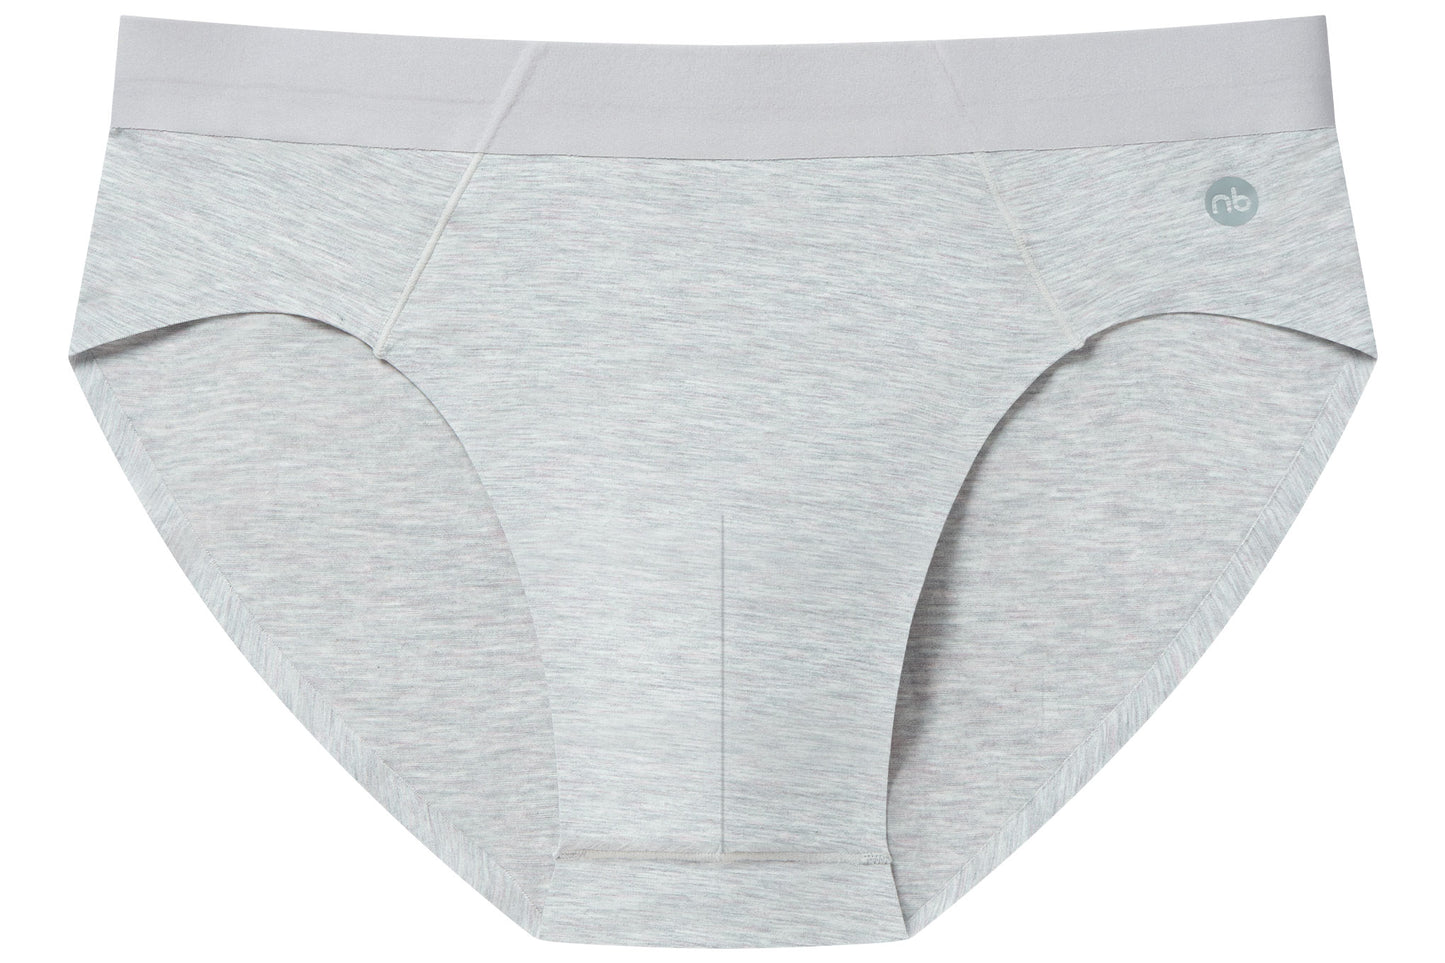 Men's Basics Briefs (Bamboo Spandex, 2 Pack) - Charcoal And Grey Dusk